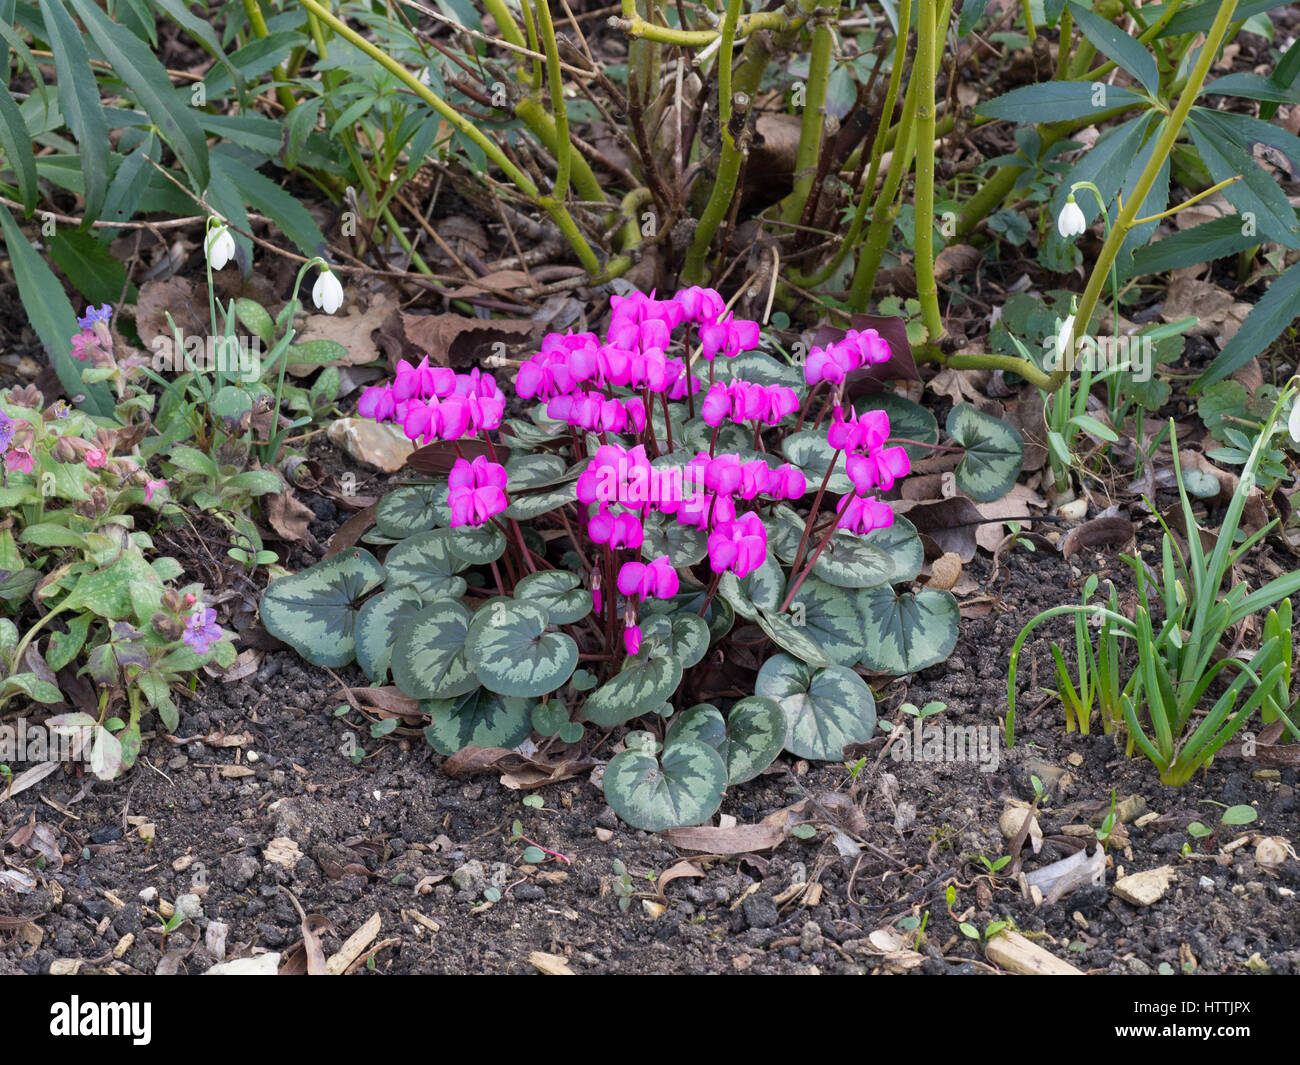 Cyclamen coum plant with deep pink flowers Stock Photo